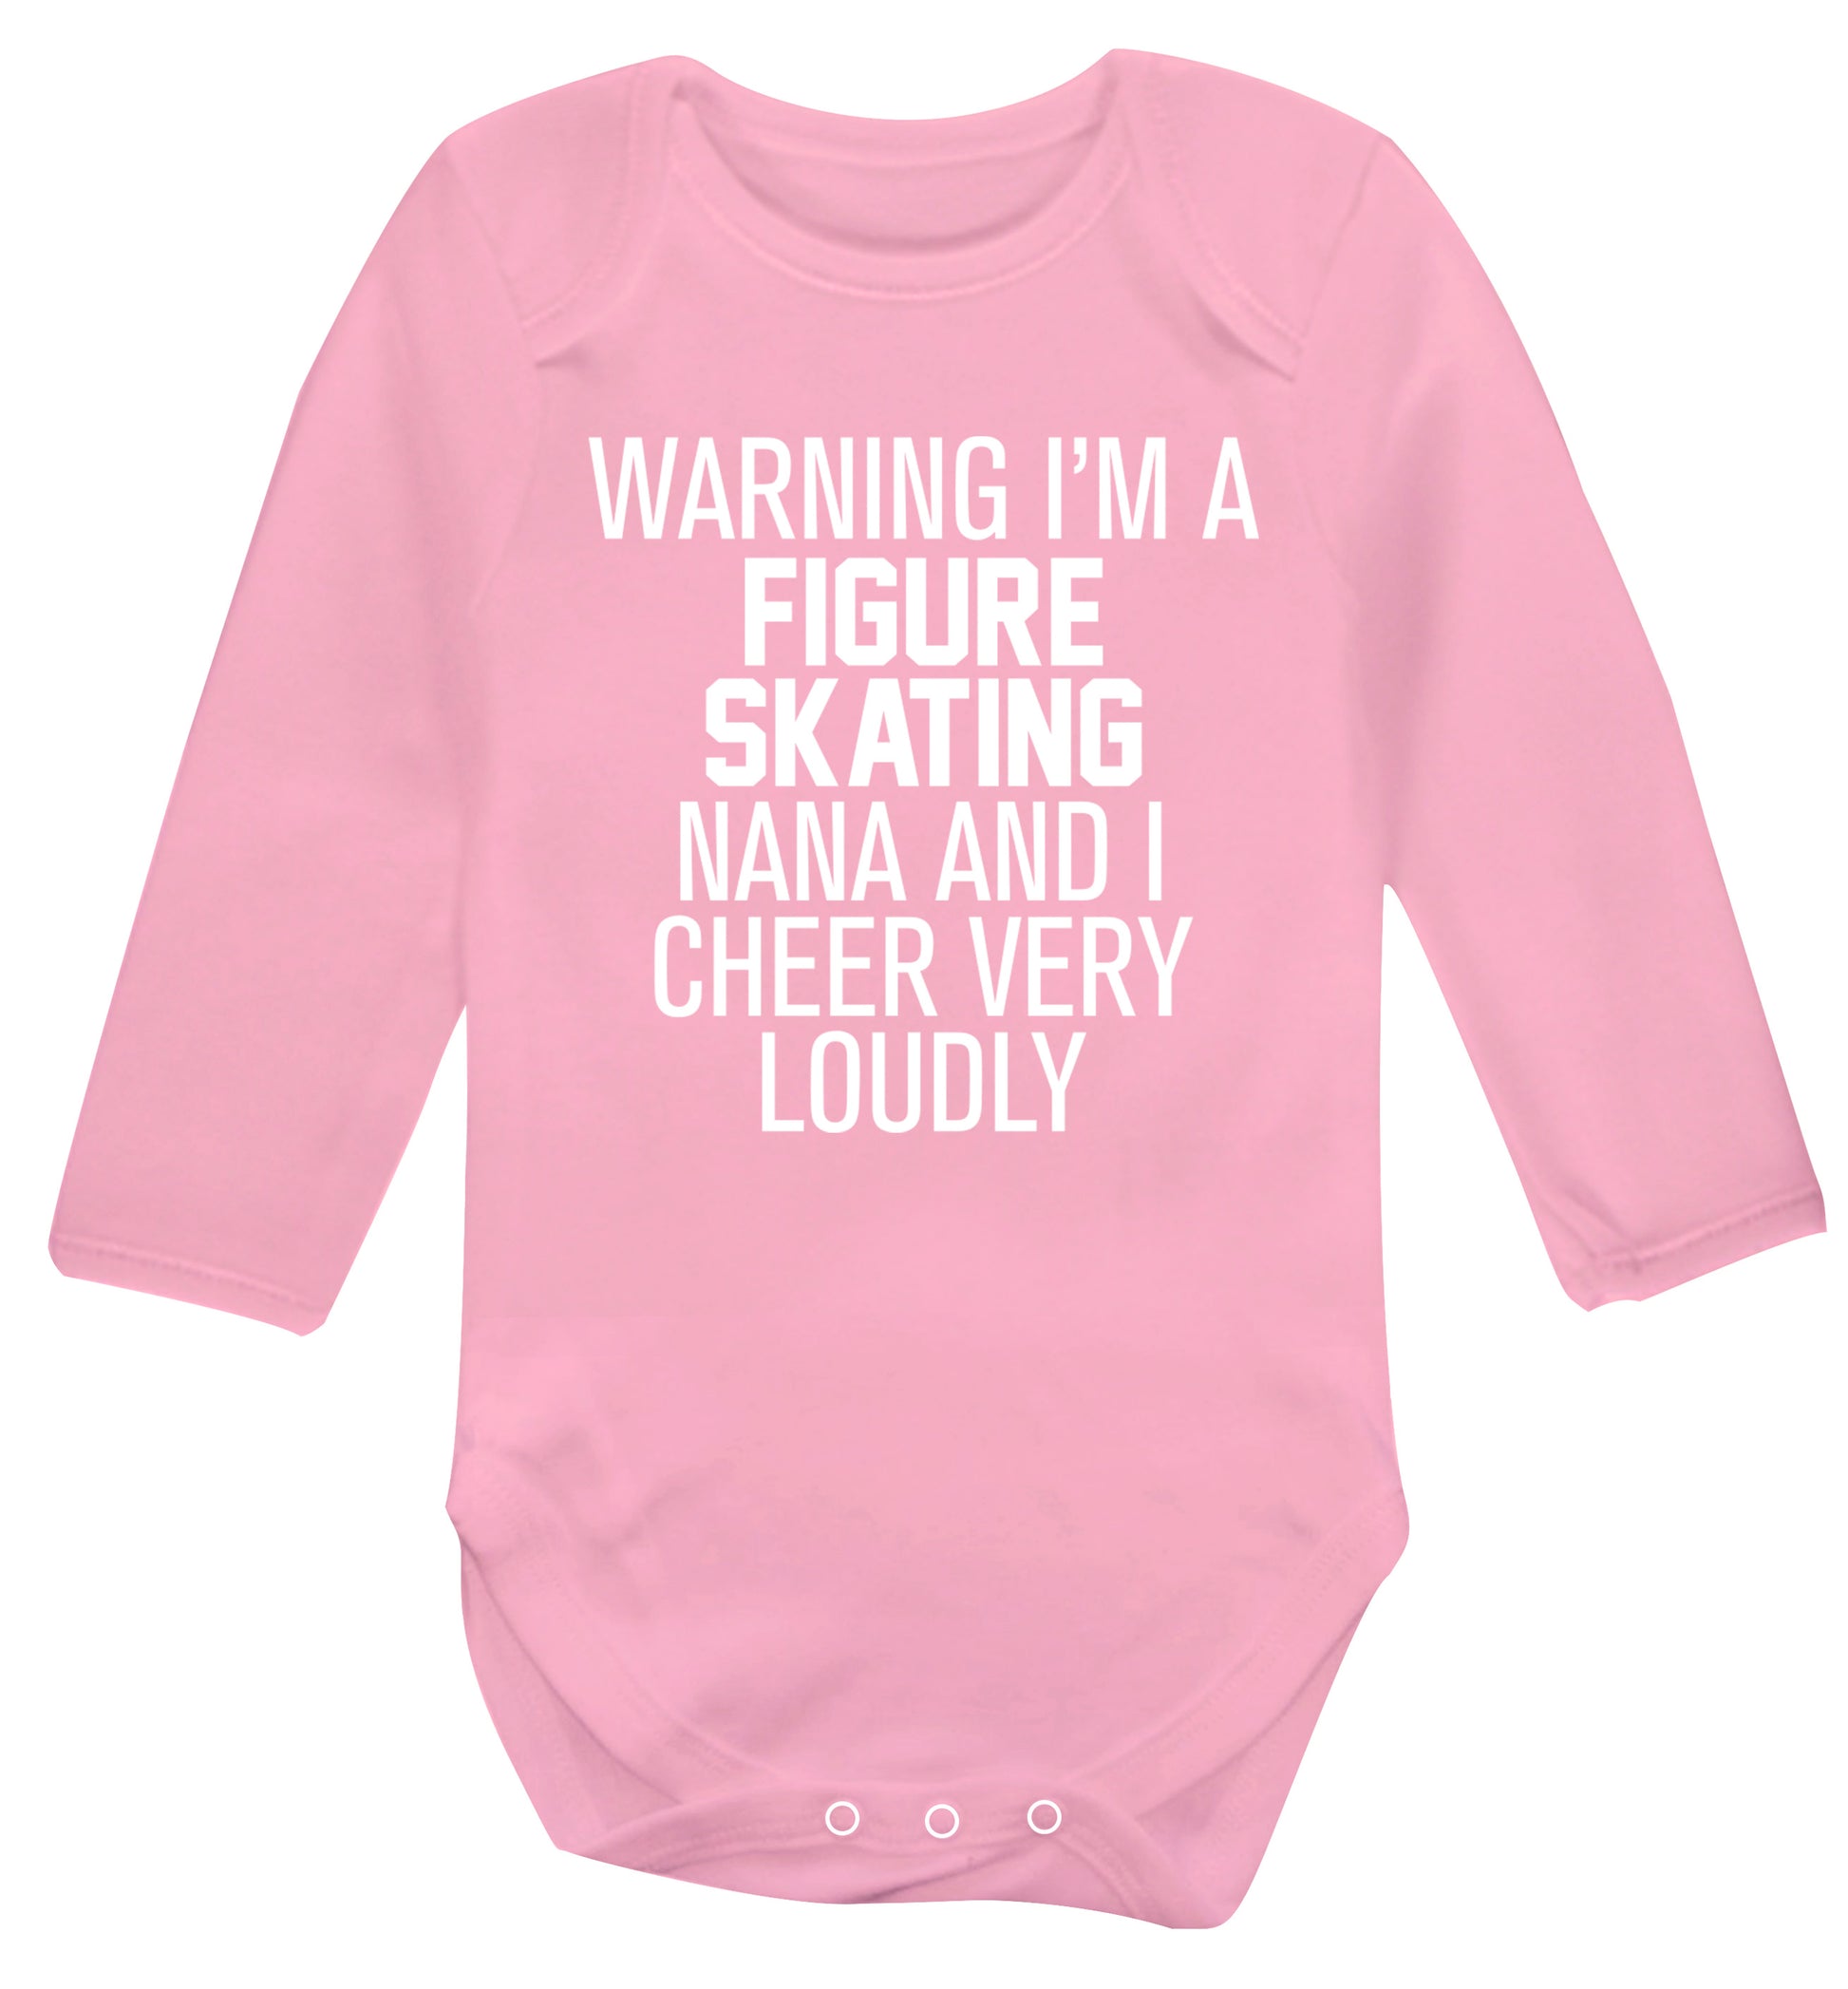 Warning I'm a figure skating nana and I cheer very loudly Baby Vest long sleeved pale pink 6-12 months